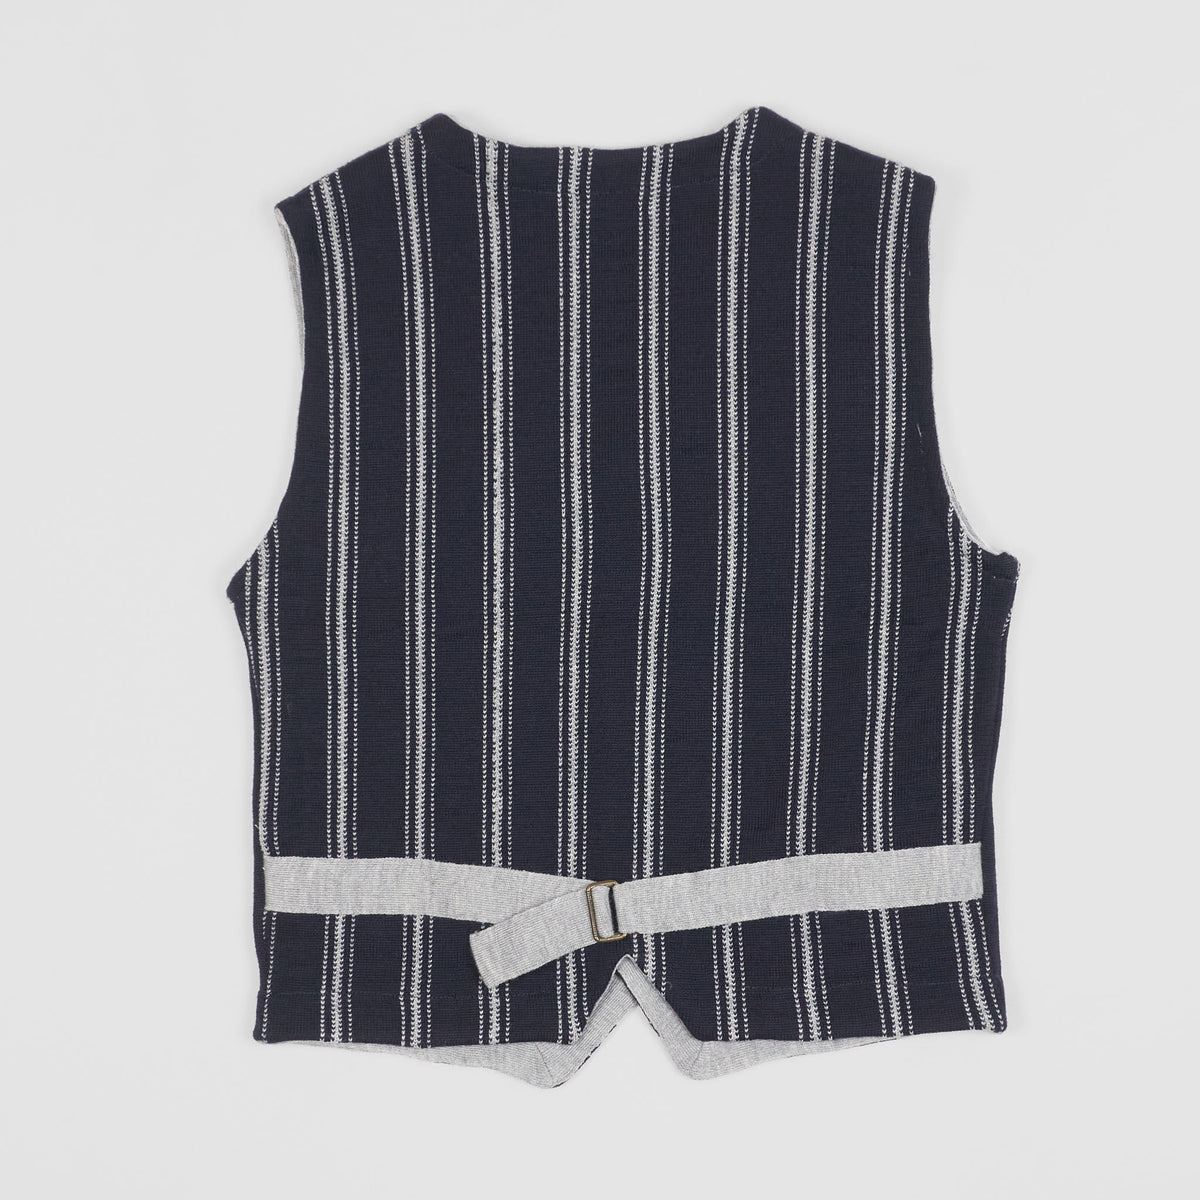 A Piece of Chic Striped Wool Vest